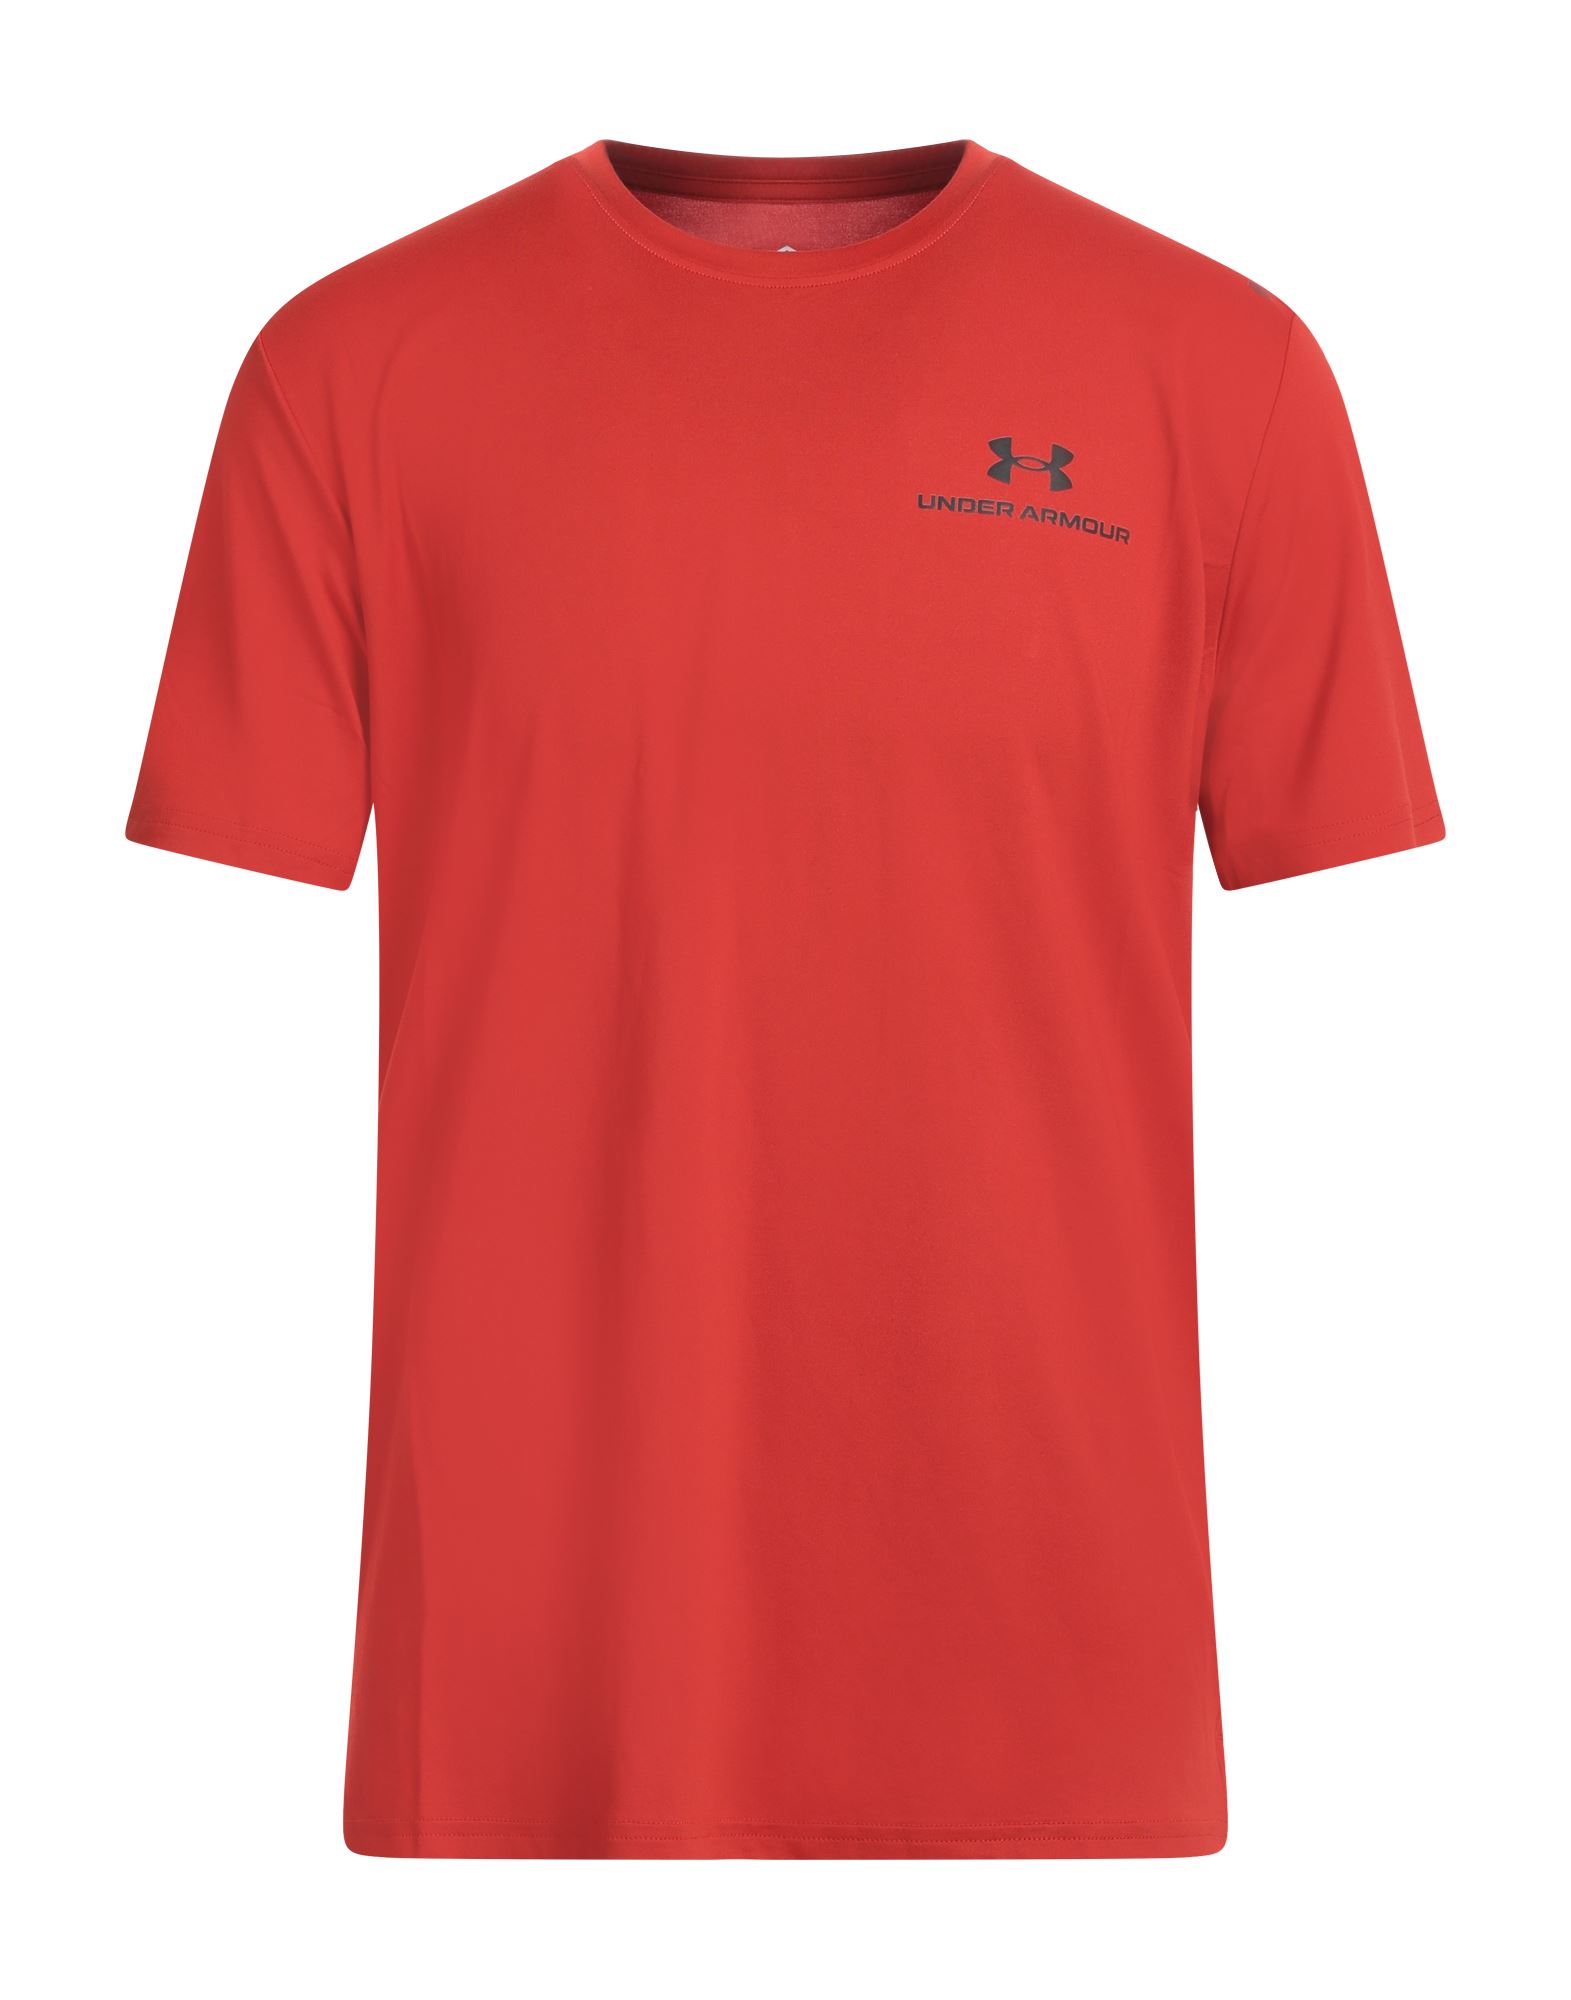 Men's Under Armour Navy Frisco RoughRiders Performance T-Shirt